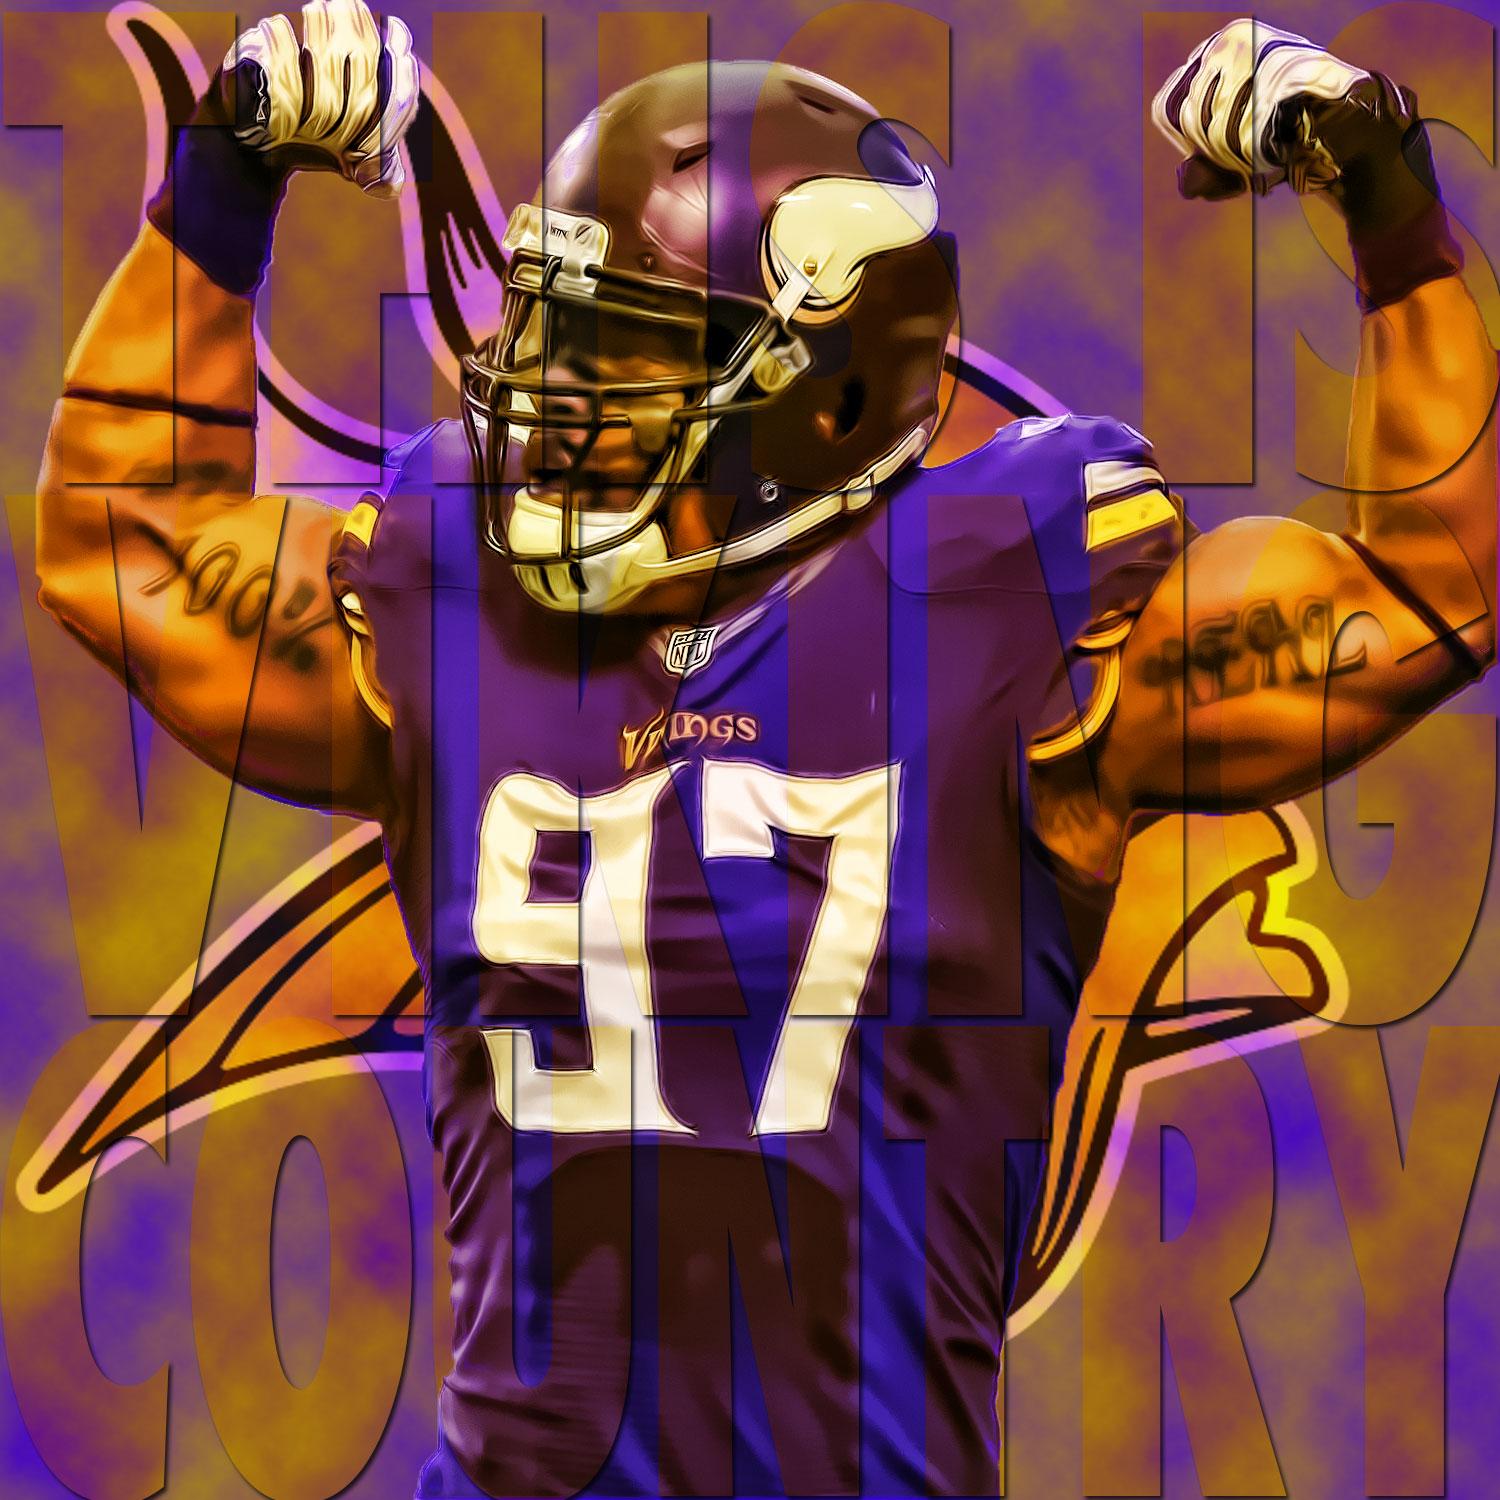 Everson Griffen edit! I'm trying different styles out, I hope you